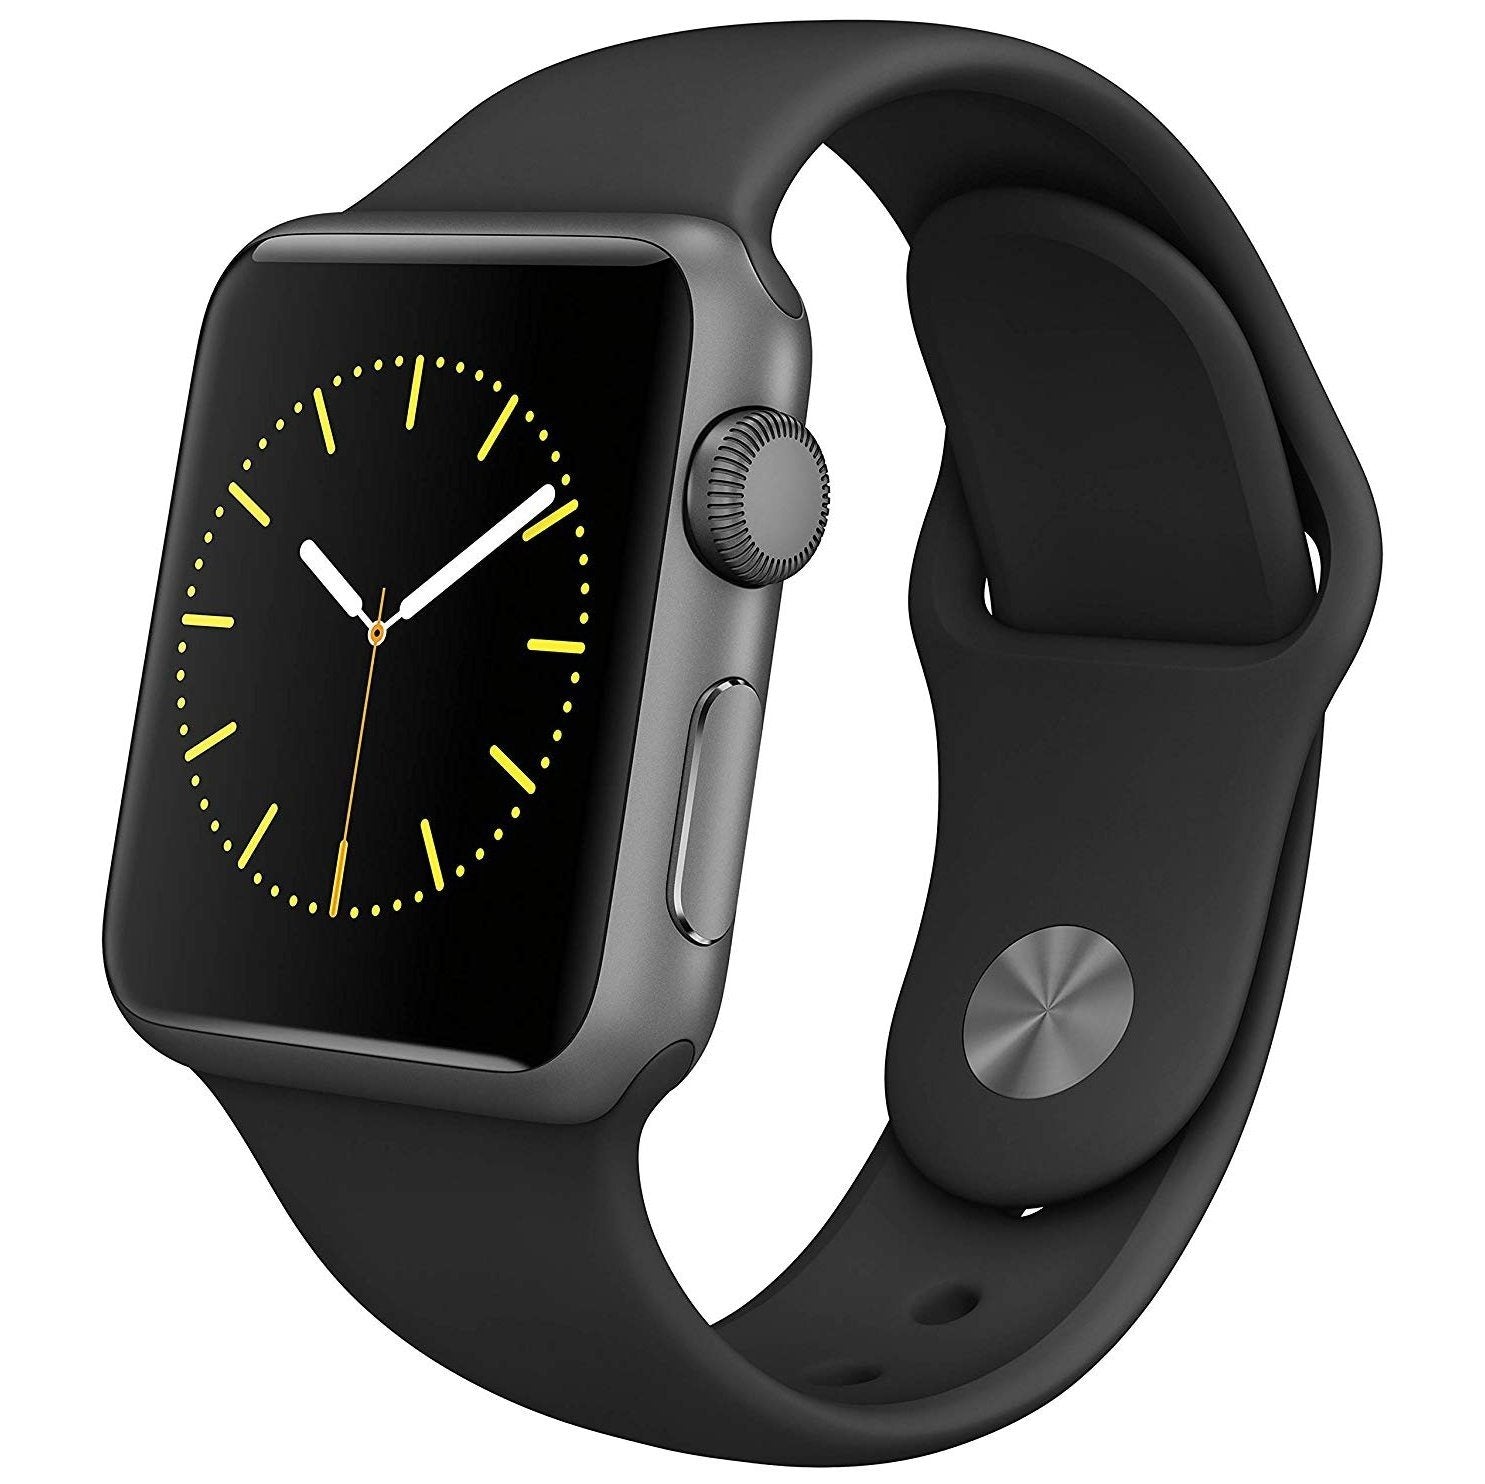 Apple Watch Smartwatch - Assorted Sizes and Colors / White / 42mm